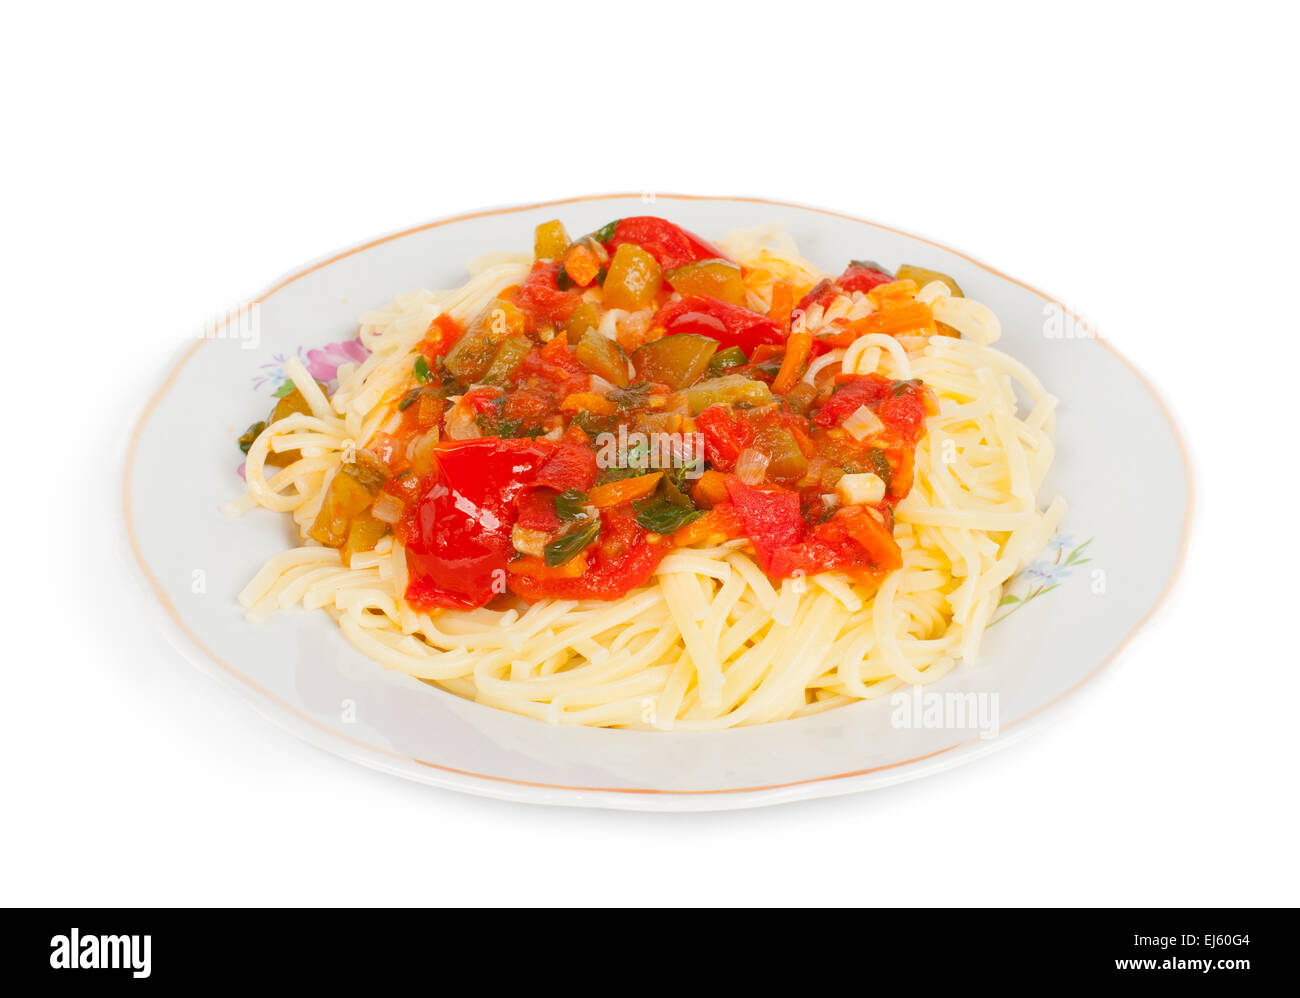 Noodles with vegetables on the plate. Isolated over white Stock Photo